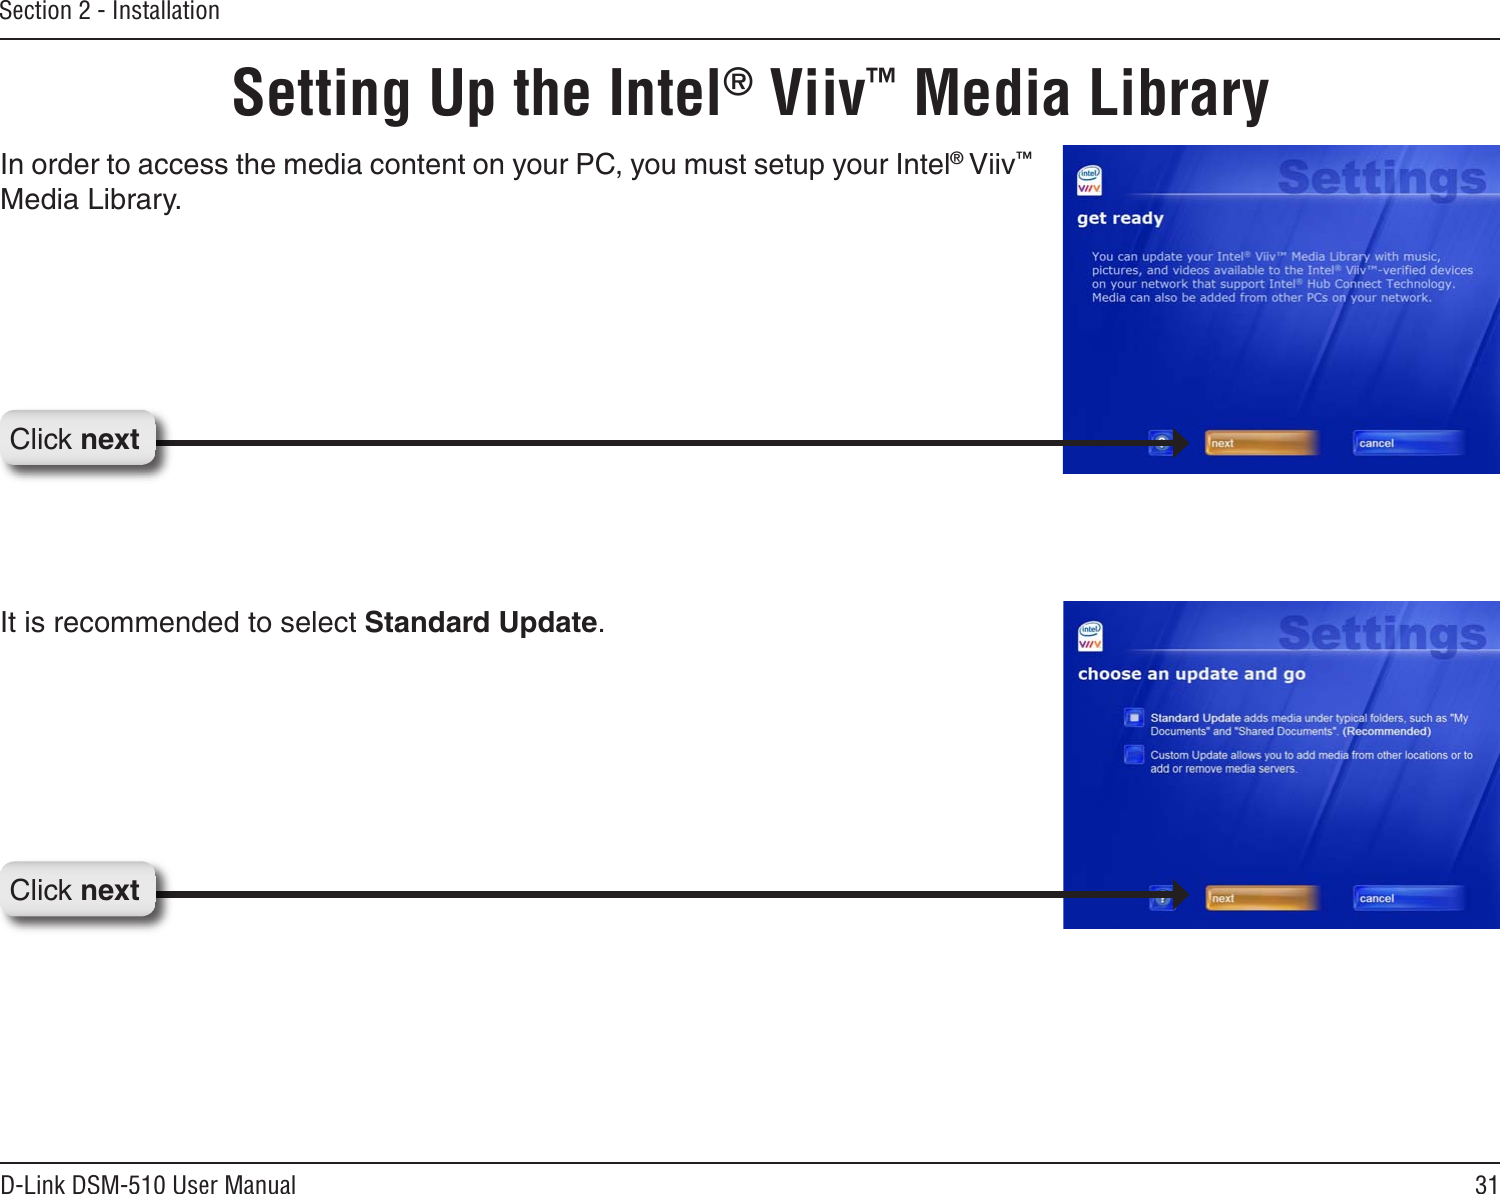 31D-Link DSM-510 User ManualSection 2 - InstallationIn order to access the media content on your PC, you must setup your Intel® Viiv™ Media Library.It is recommended to select Standard Update.Setting Up the Intel® Viiv™ Media LibraryClick nextClick next